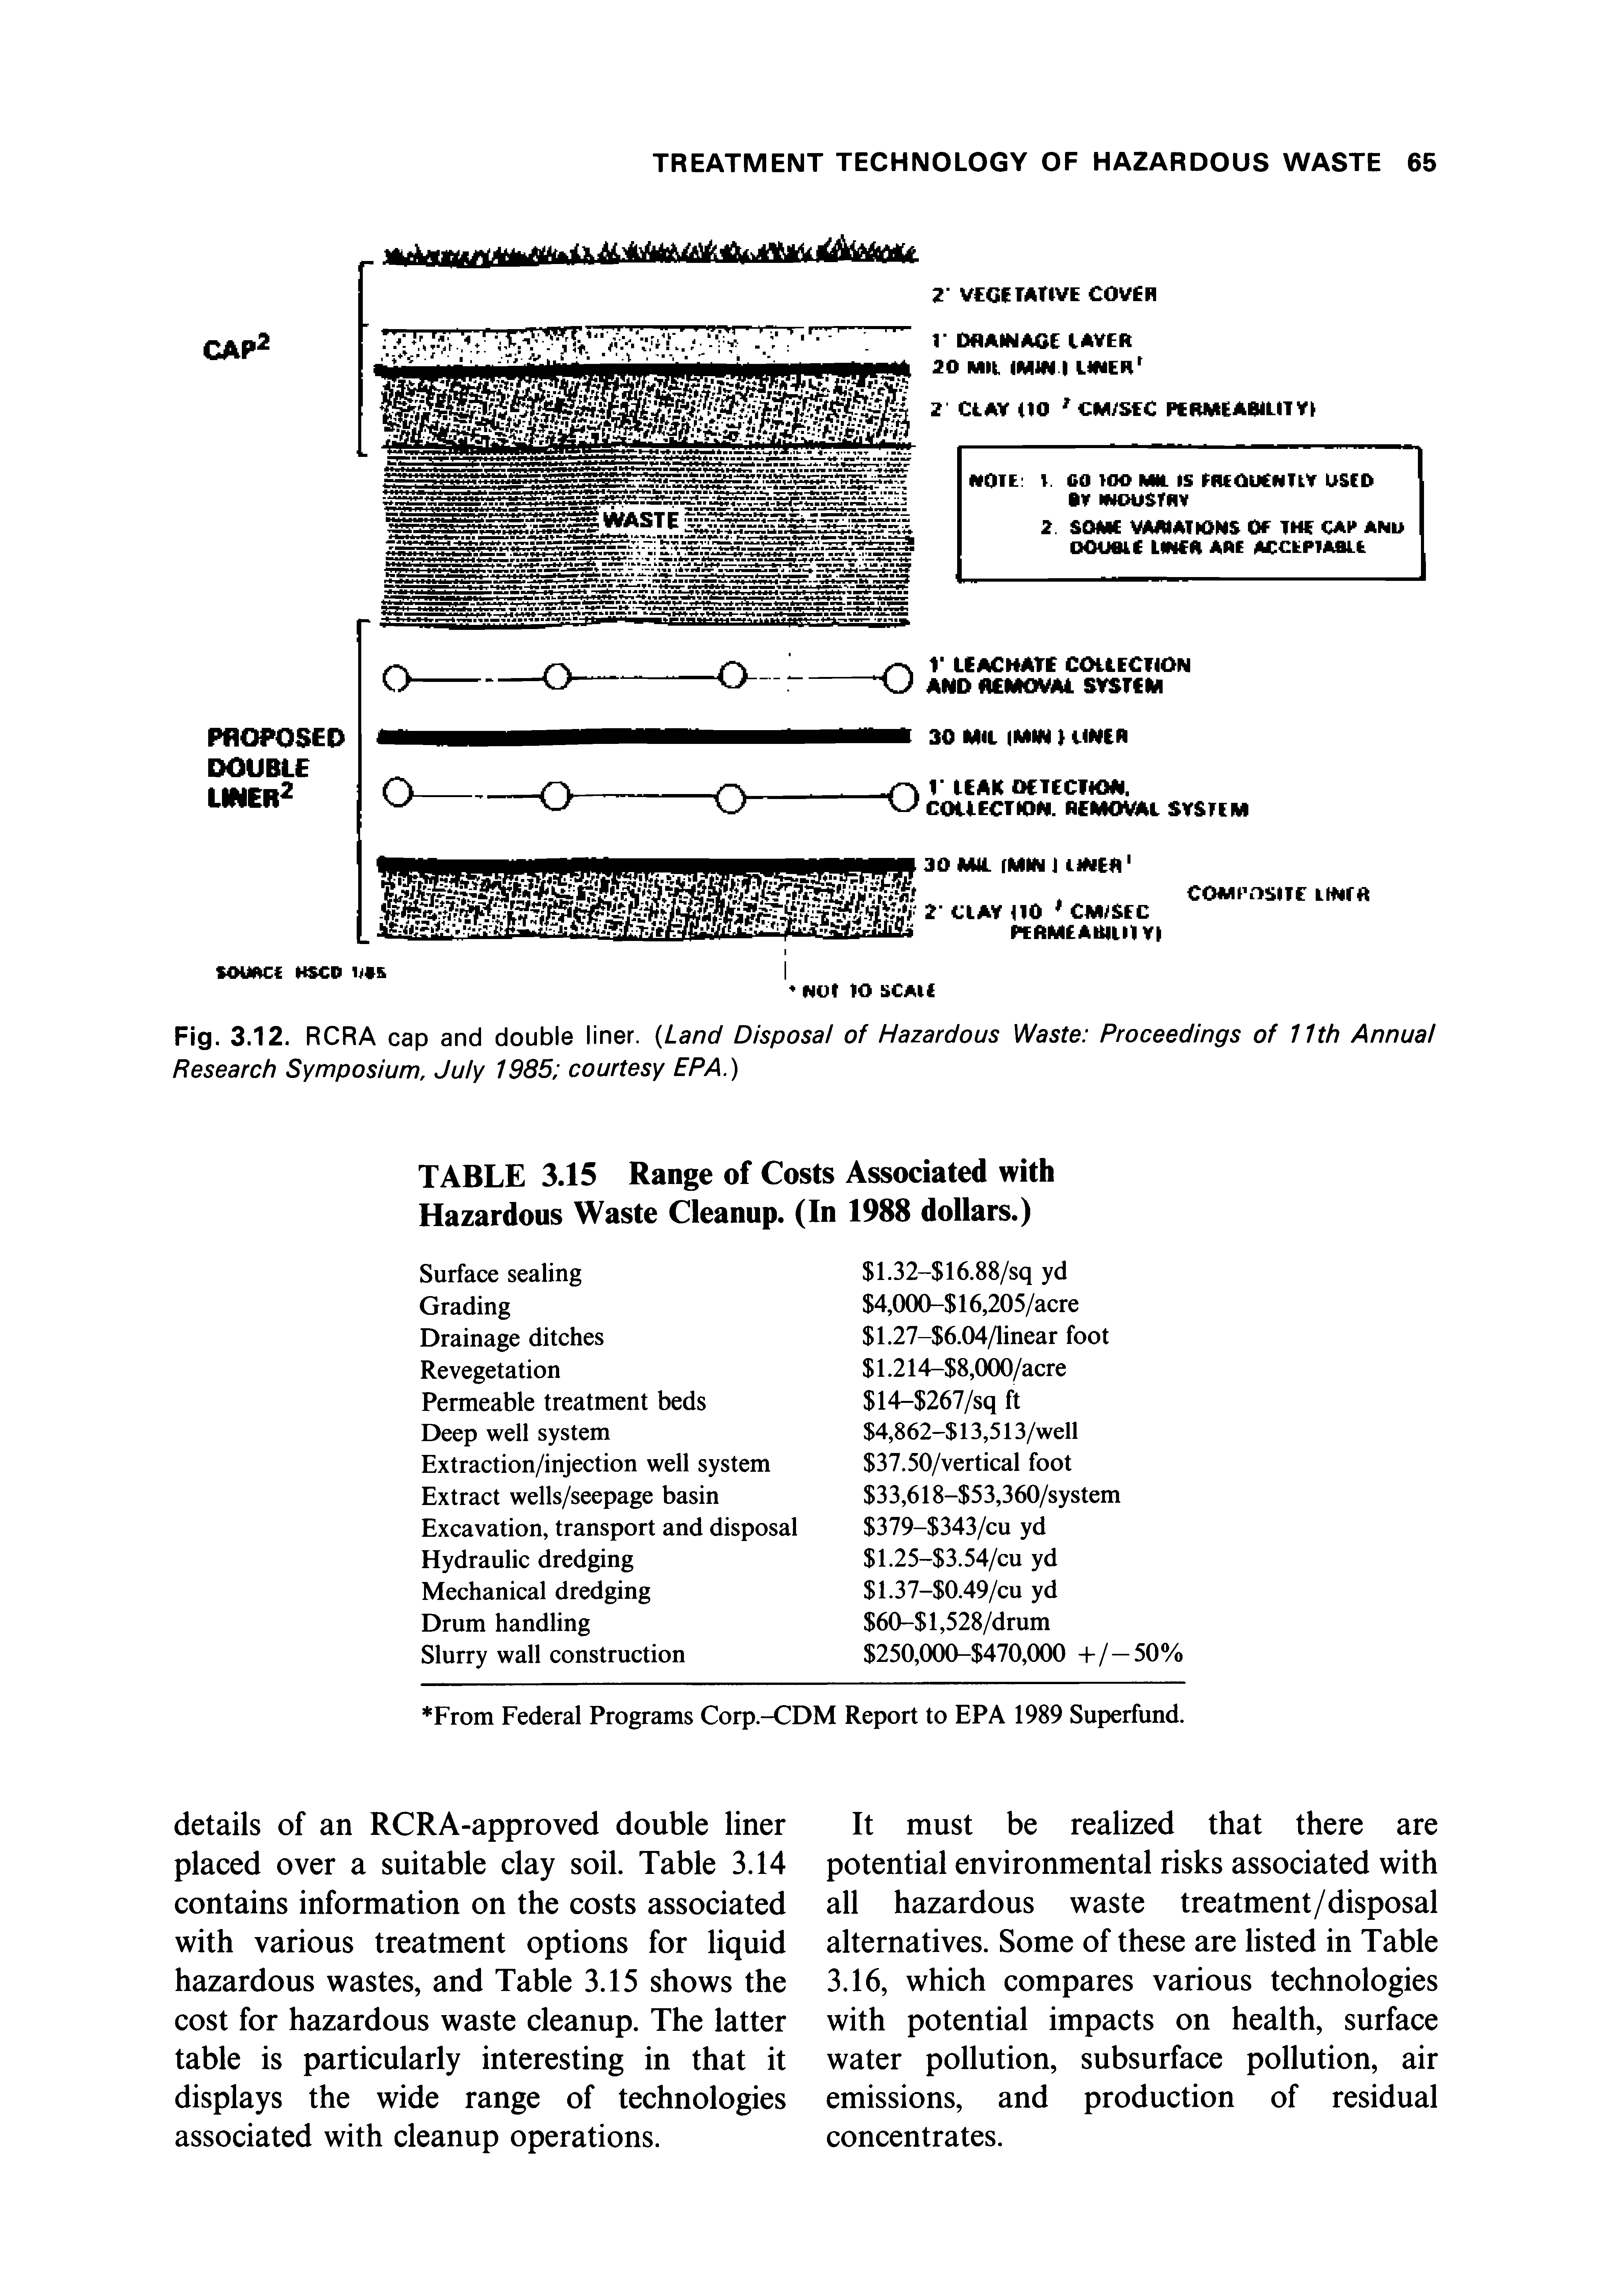 Fig. 3.12. RCRA cap and double liner. (Land Disposal of Hazardous Waste Proceedings of 11th Annual Research Symposium, July 1985 courtesy EPA.)...